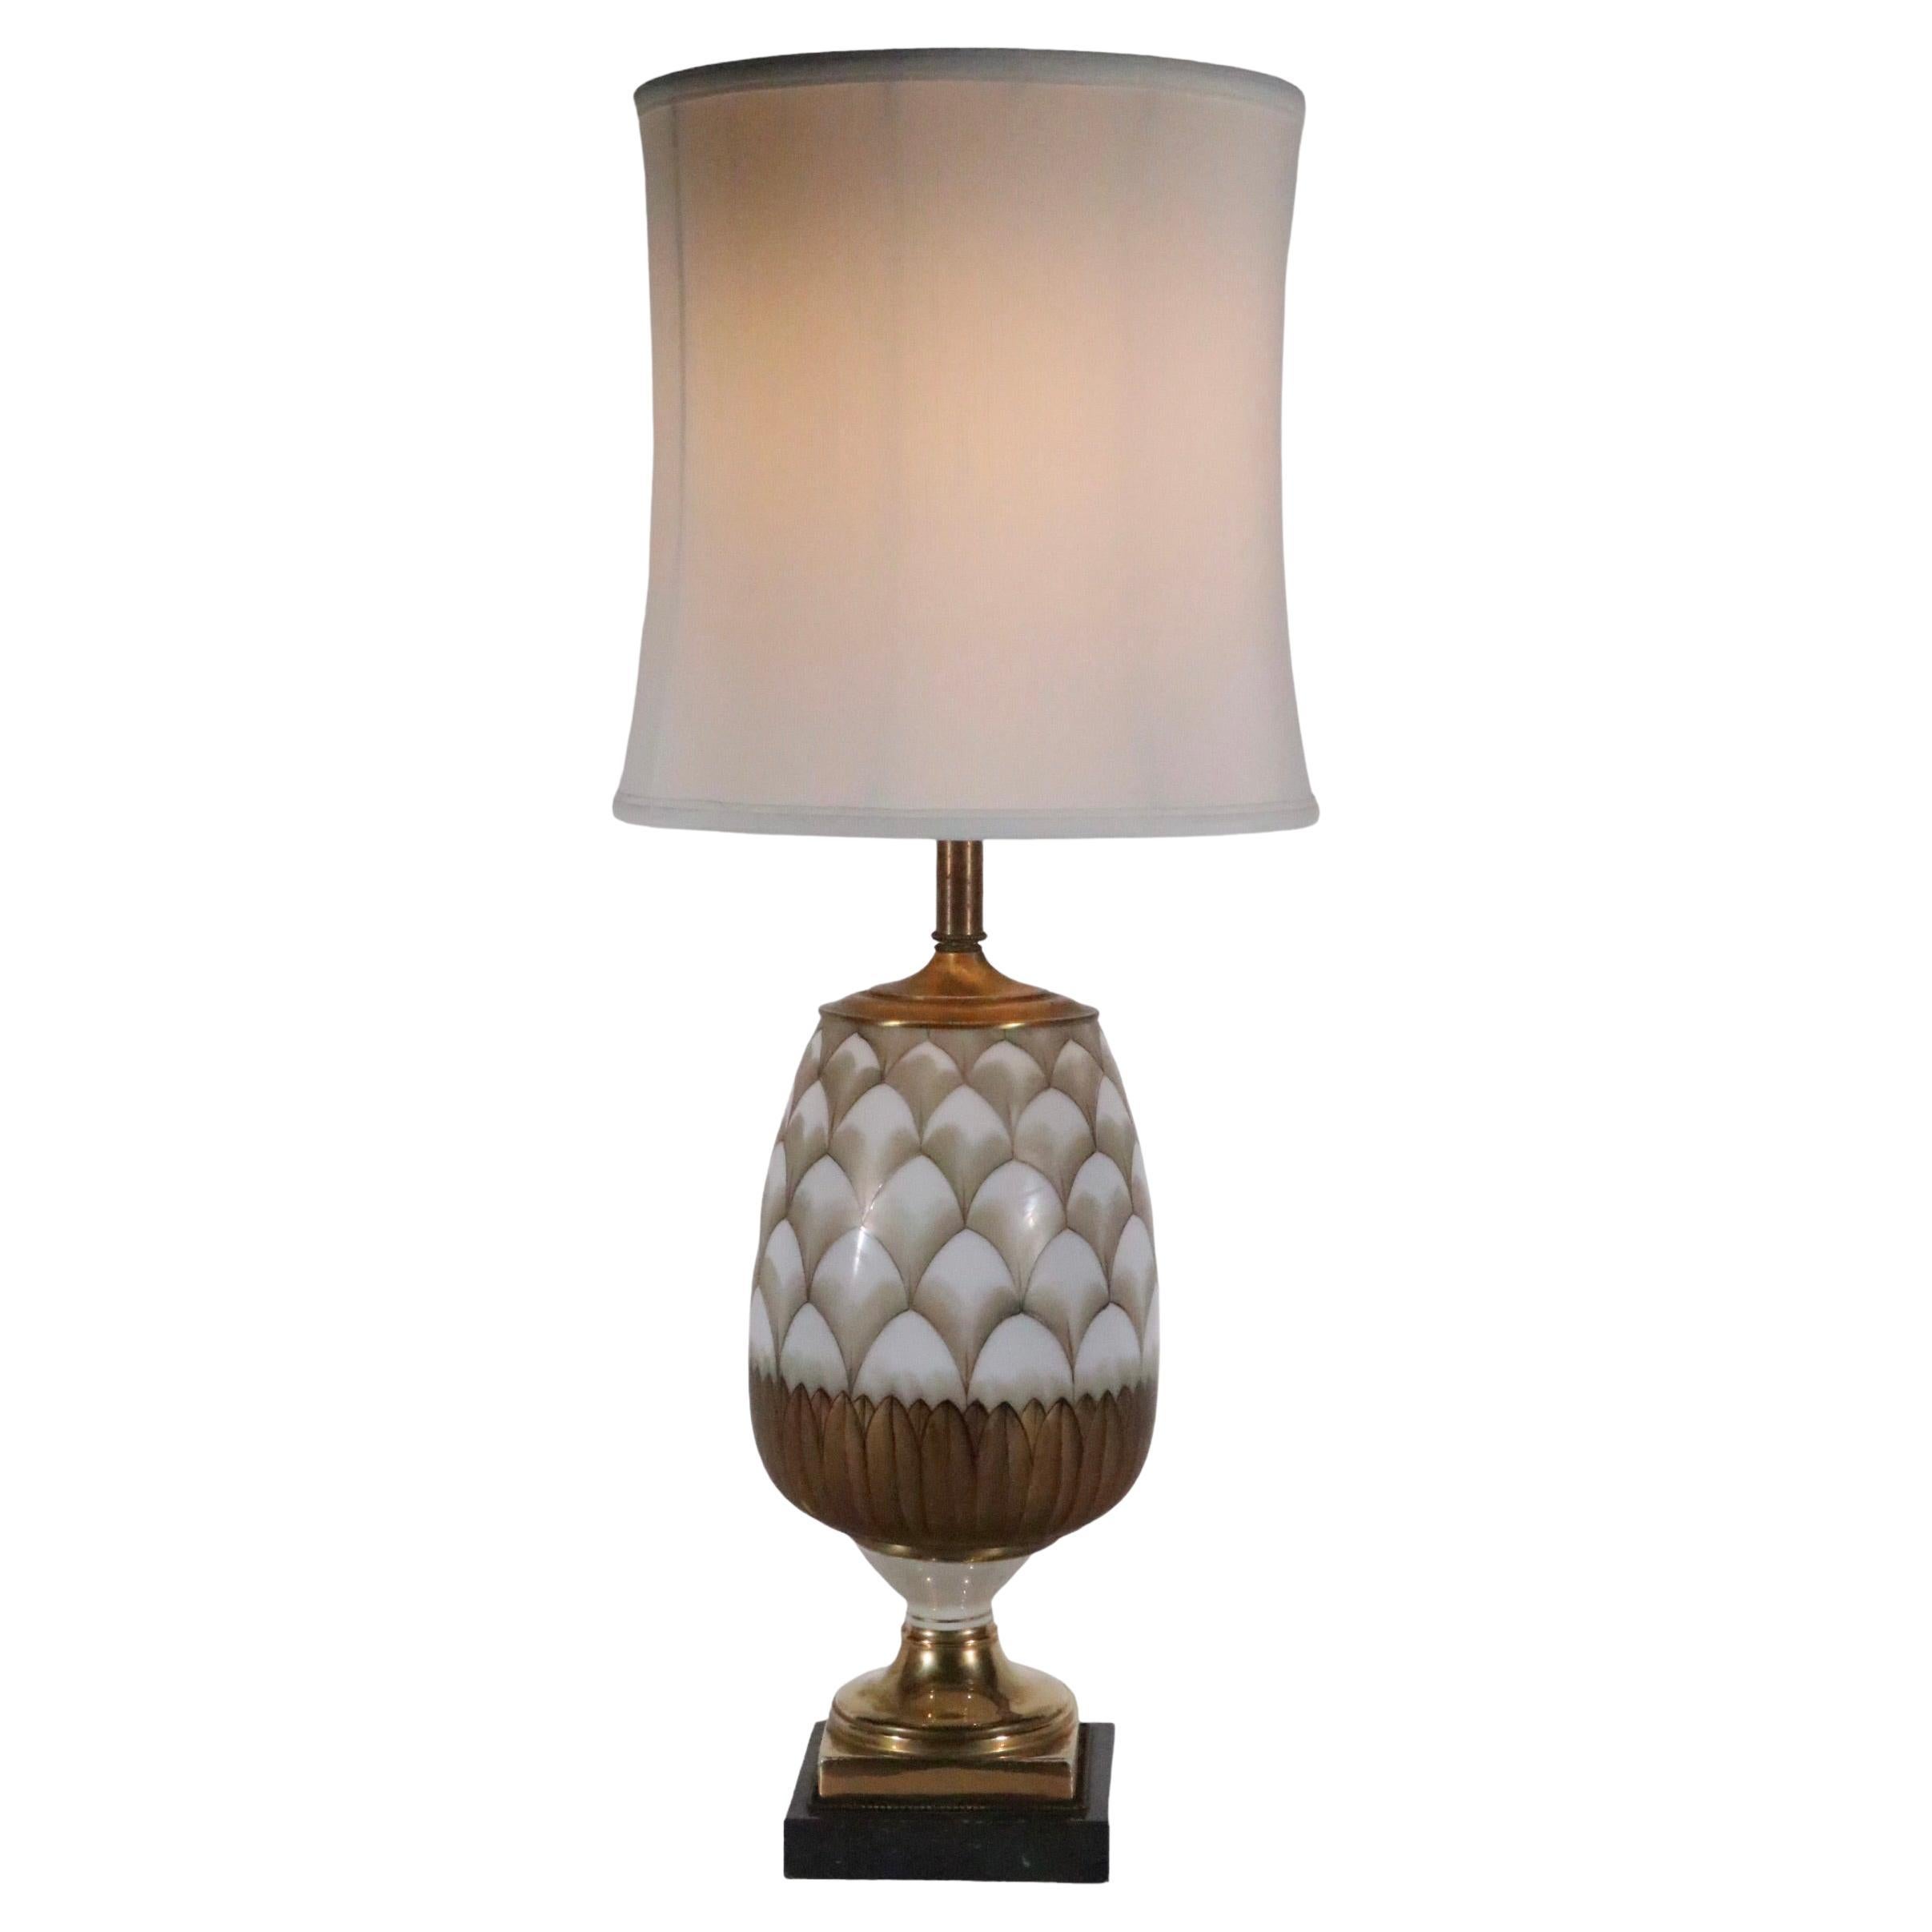 Exceptional decorative table lamp, circa 1940/1960.design attributed to Tommi Parzinger. The lamp features a glass body mounted on a ceramic base, which is mounted on a marble plinth base. The center glass body displays a hand-painted  pattern